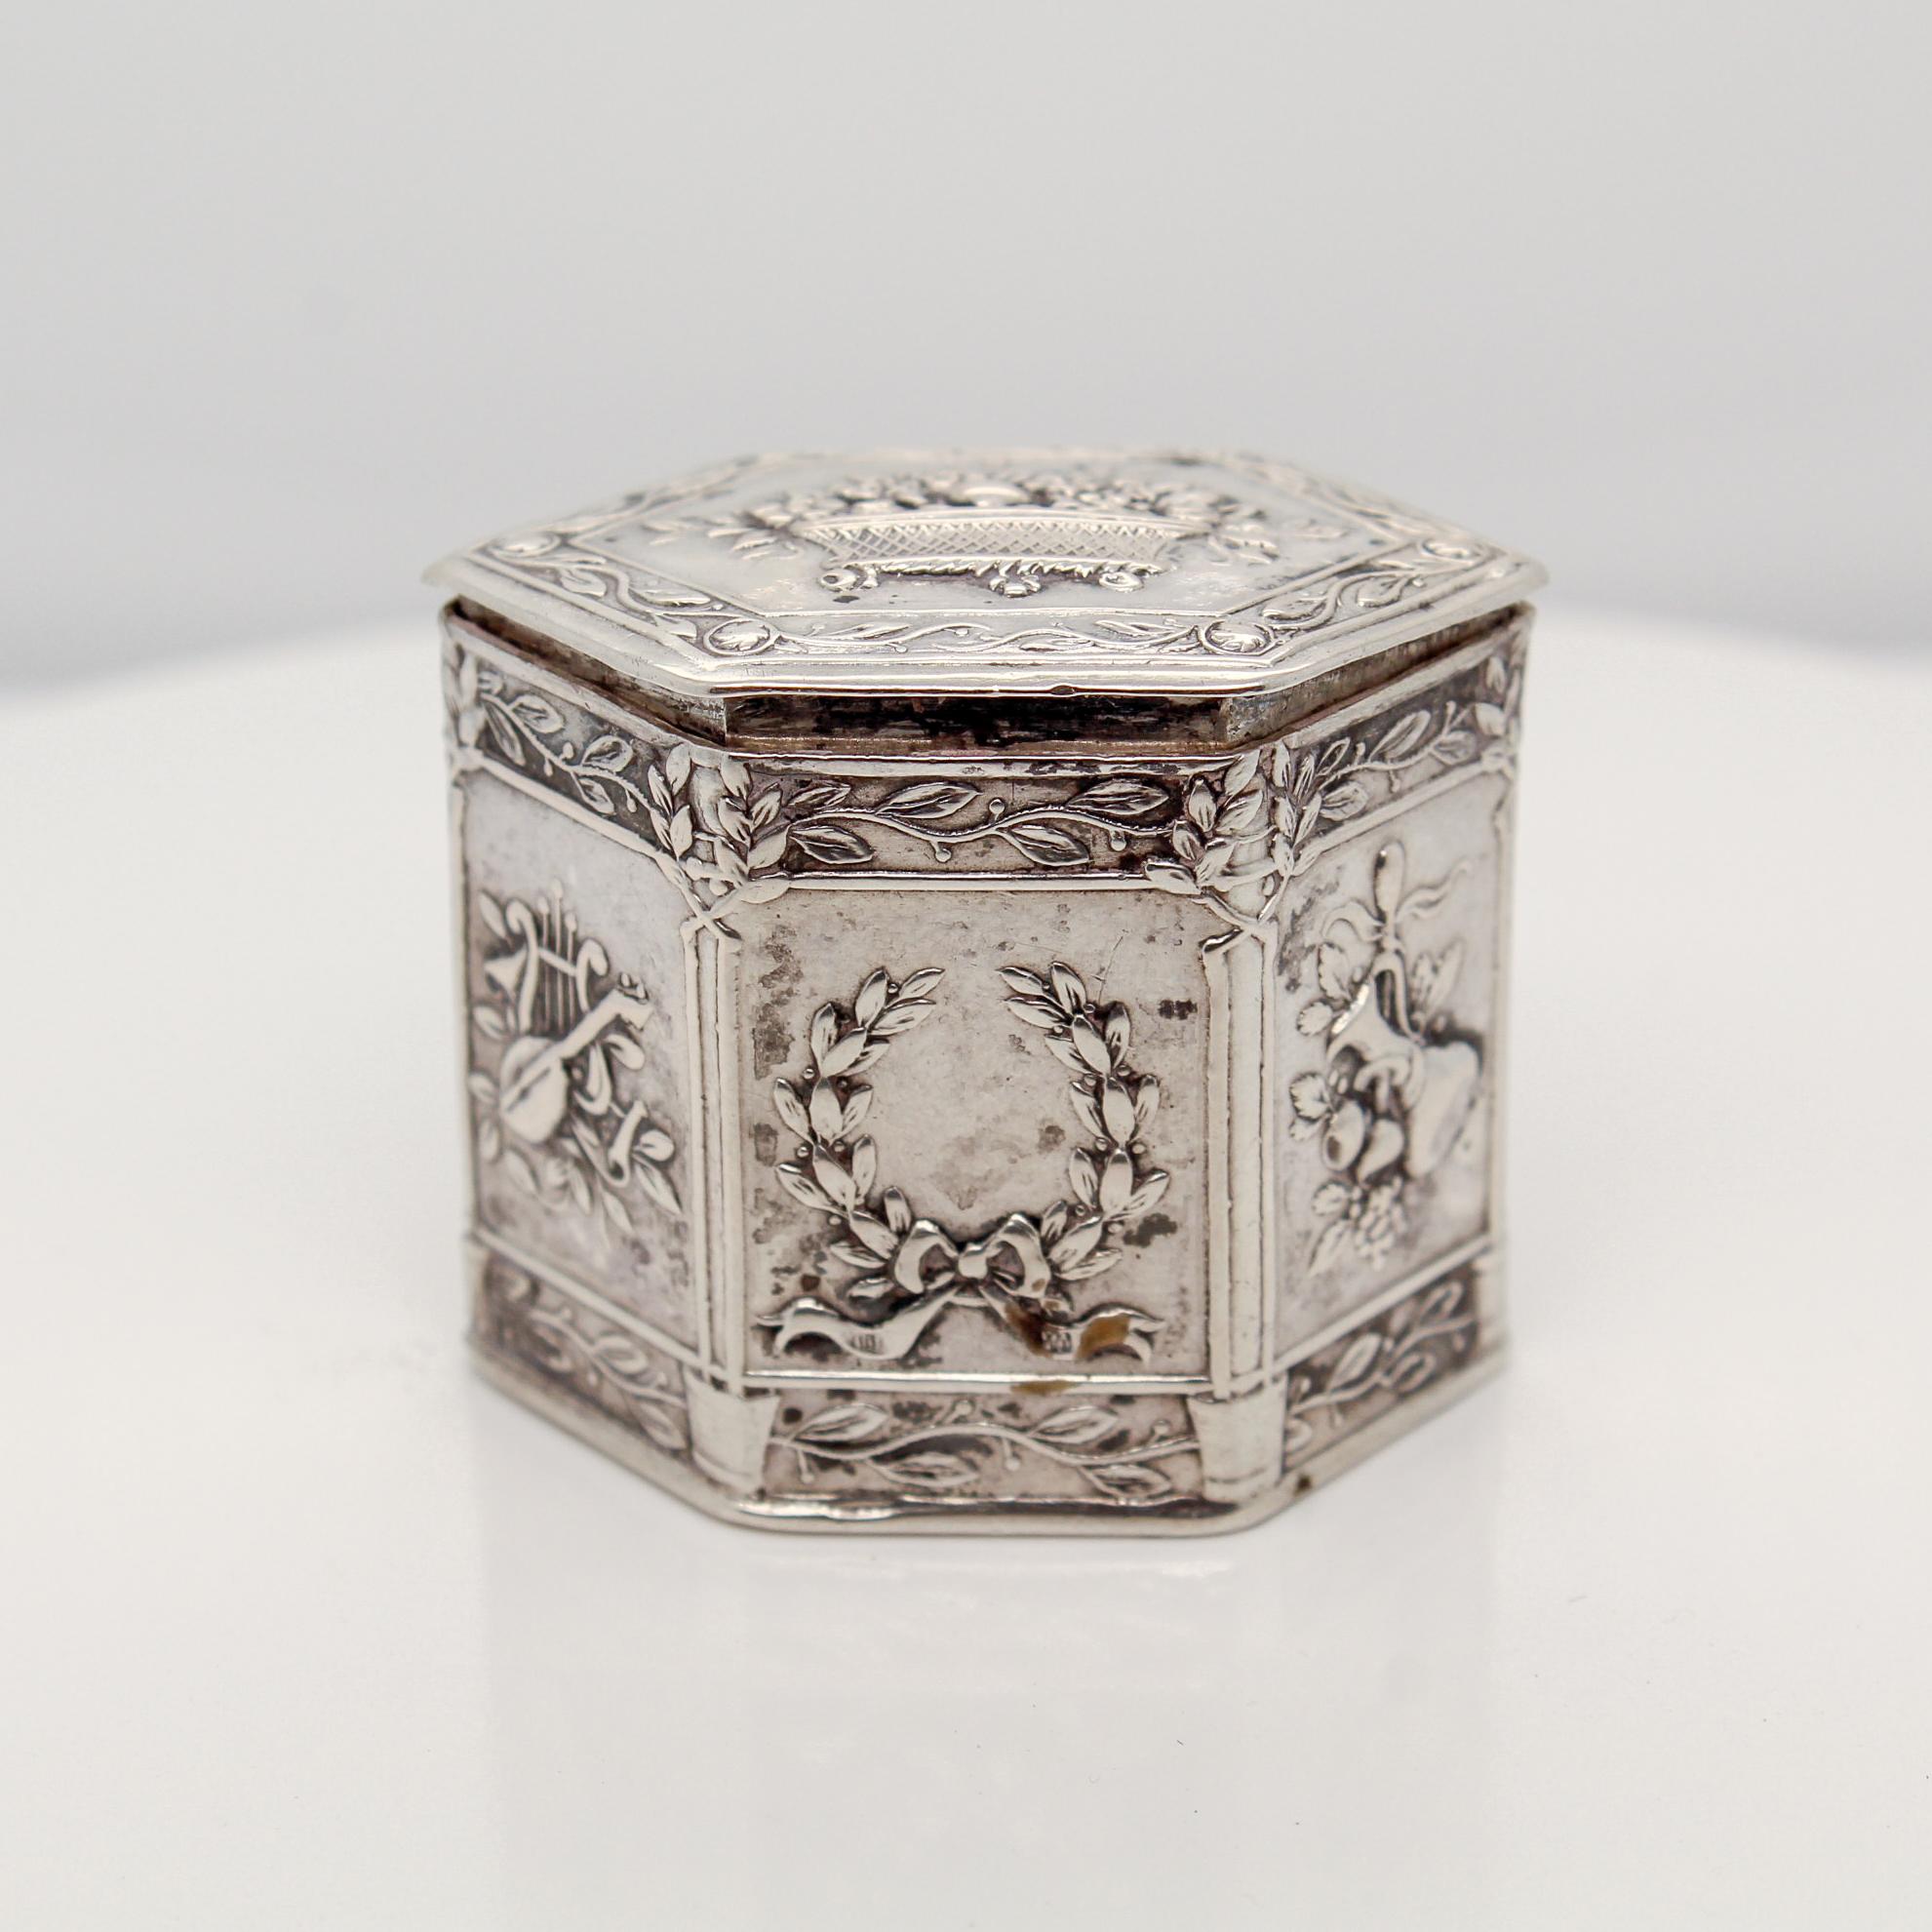 A fine antique German silver vanity or snuff box.

In 800 coin silver.

Decorated throughout with elaborate embossed floral decorations, and other miscellaneous items such as lutes, lyres, & vials.

Simply a great diminuitive box!

Date:
Late 19th